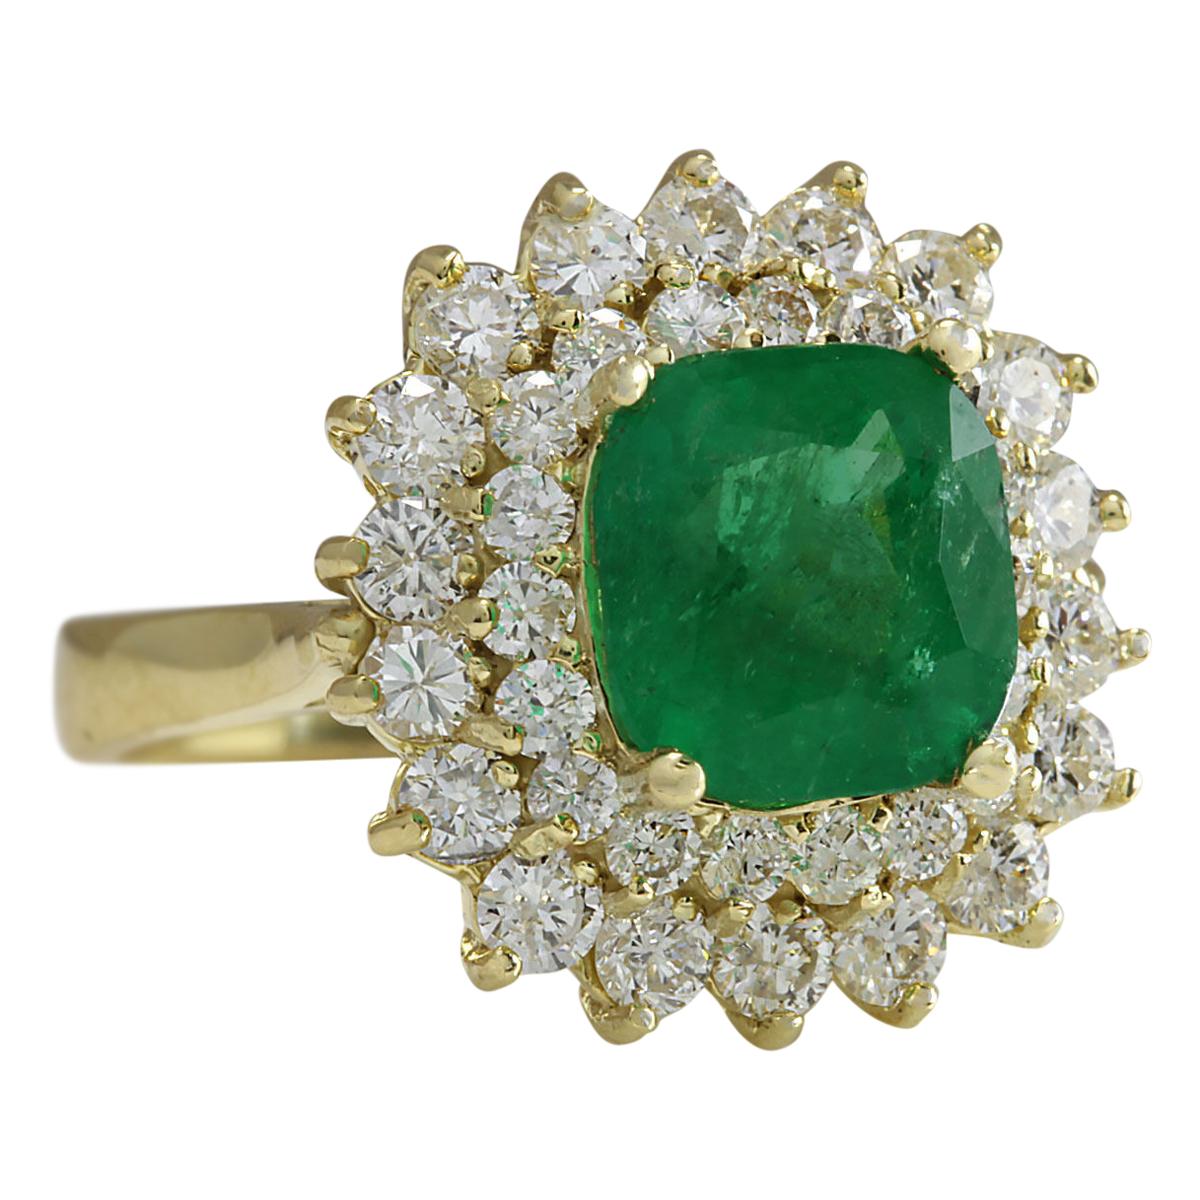 Stamped: 14K Yellow Gold
Total Ring Weight: 8.5 Grams
Total Natural Emerald Weight is 2.74 Carat (Measures: 8.50x8.50 mm)
Color: Green
Total Natural Diamond Weight is 1.60 Carat
Color: F-G, Clarity: VS2-SI1
Face Measures: 17.50x17.00 mm
Sku: